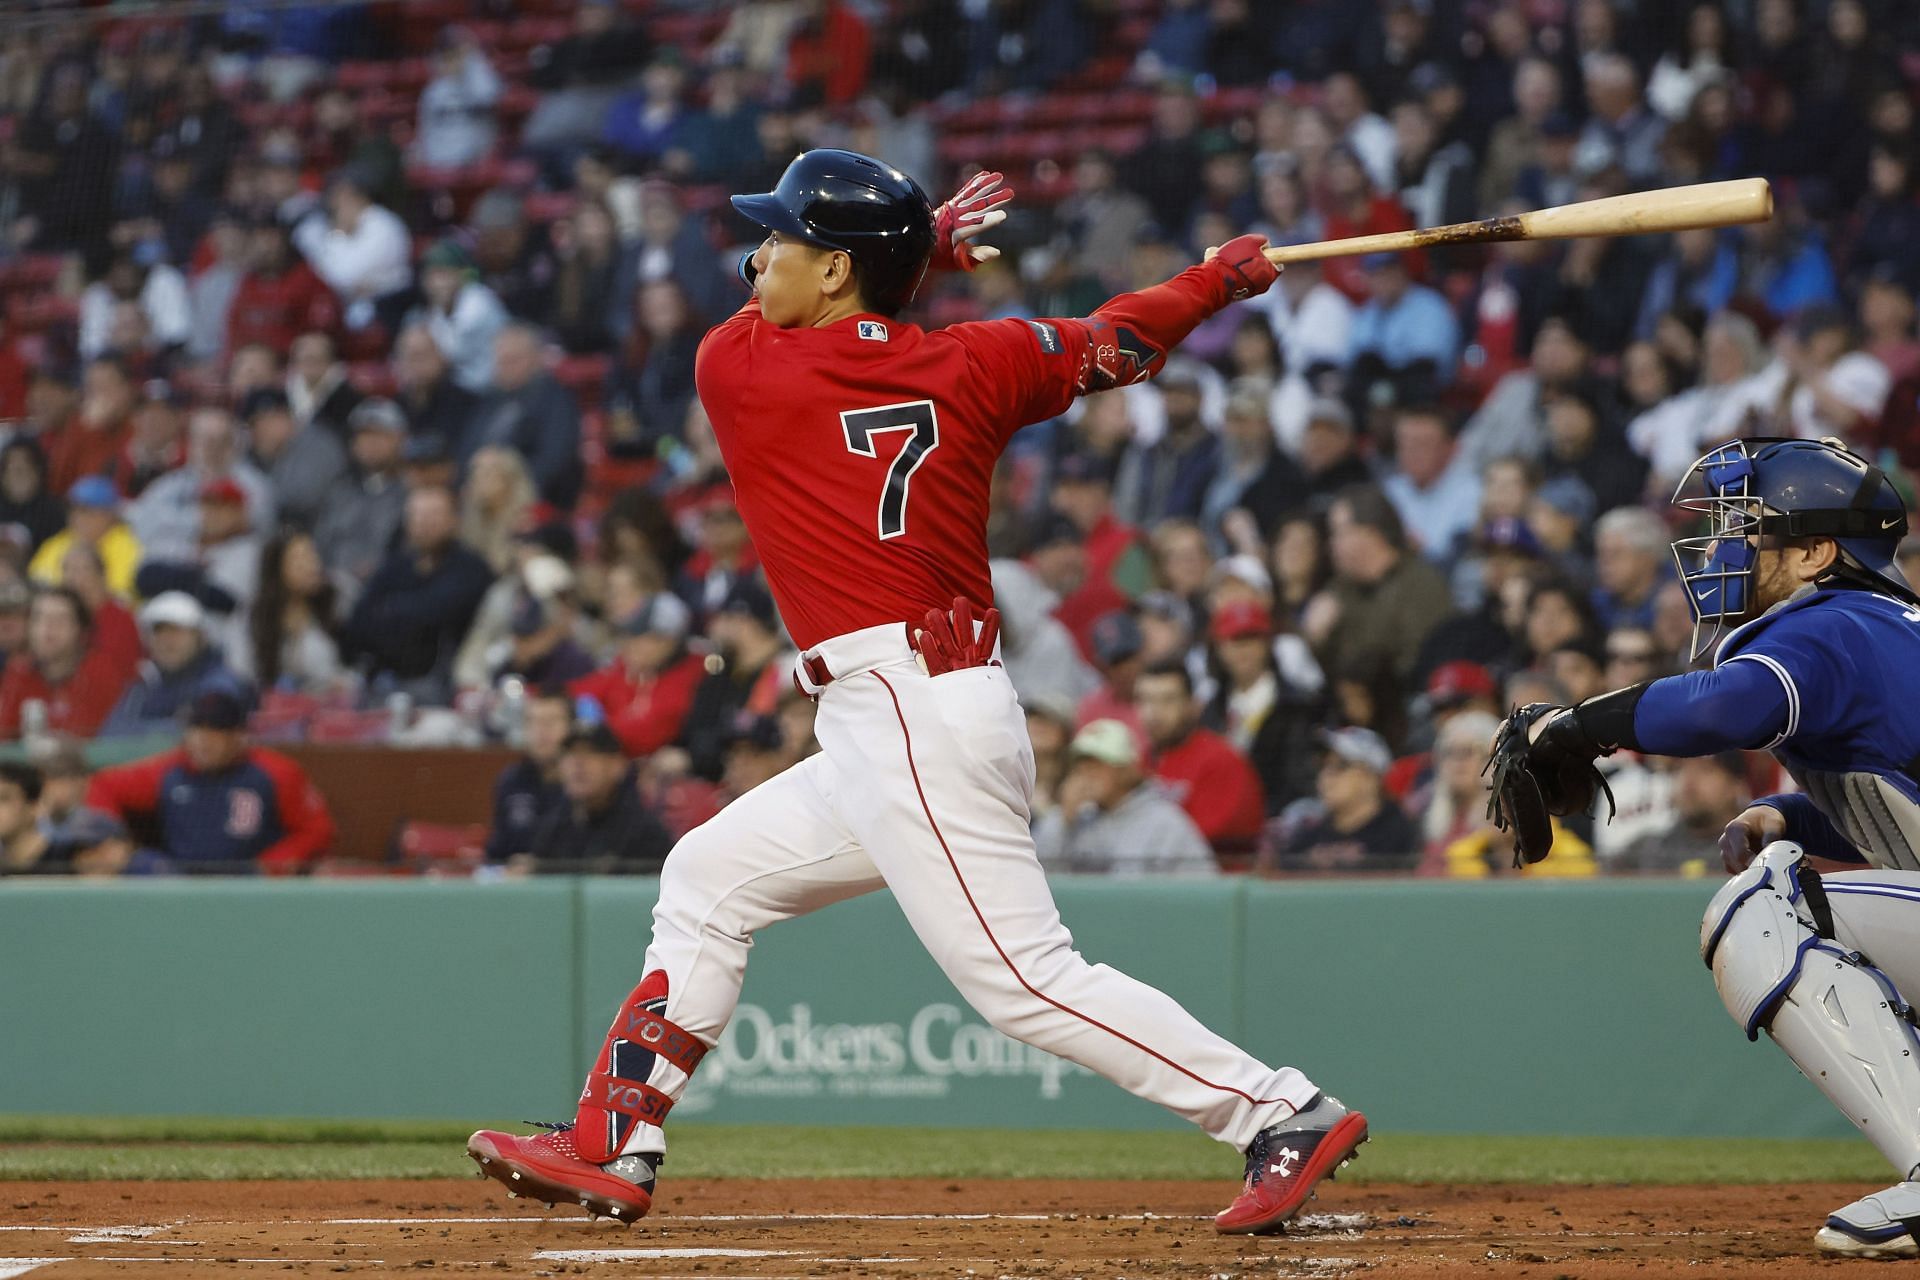 Boston Red Sox fans elated as Masataka Yoshida extends hit streak to 13  games, team wins fifth in a row: He is literally Japanese Barry Bonds